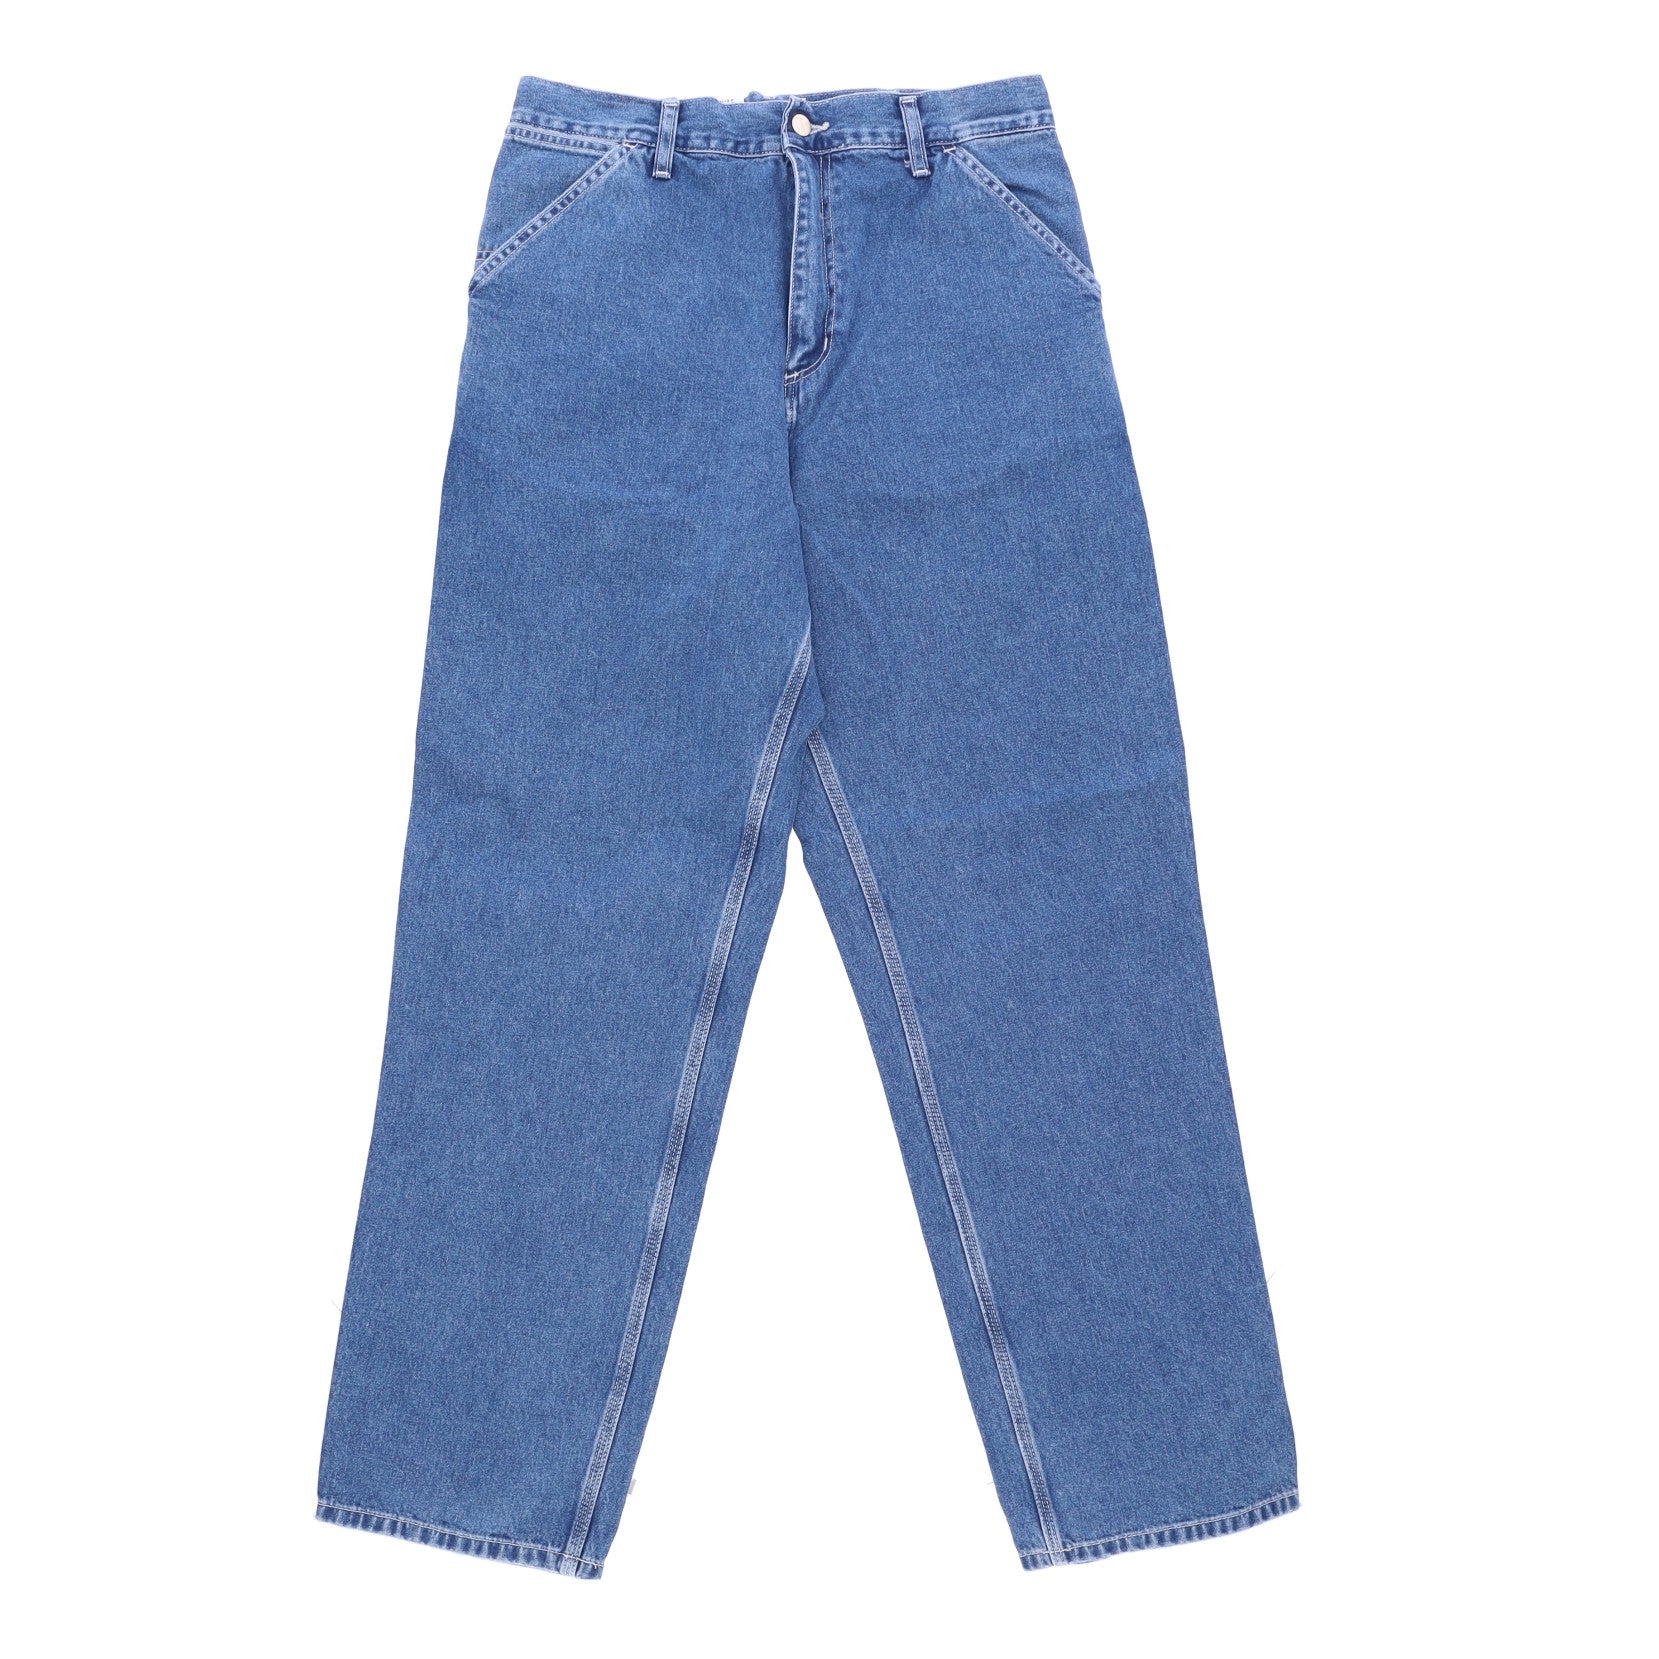 Carhartt Wip, Jeans Uomo Simple Pant, Blue Stone Washed